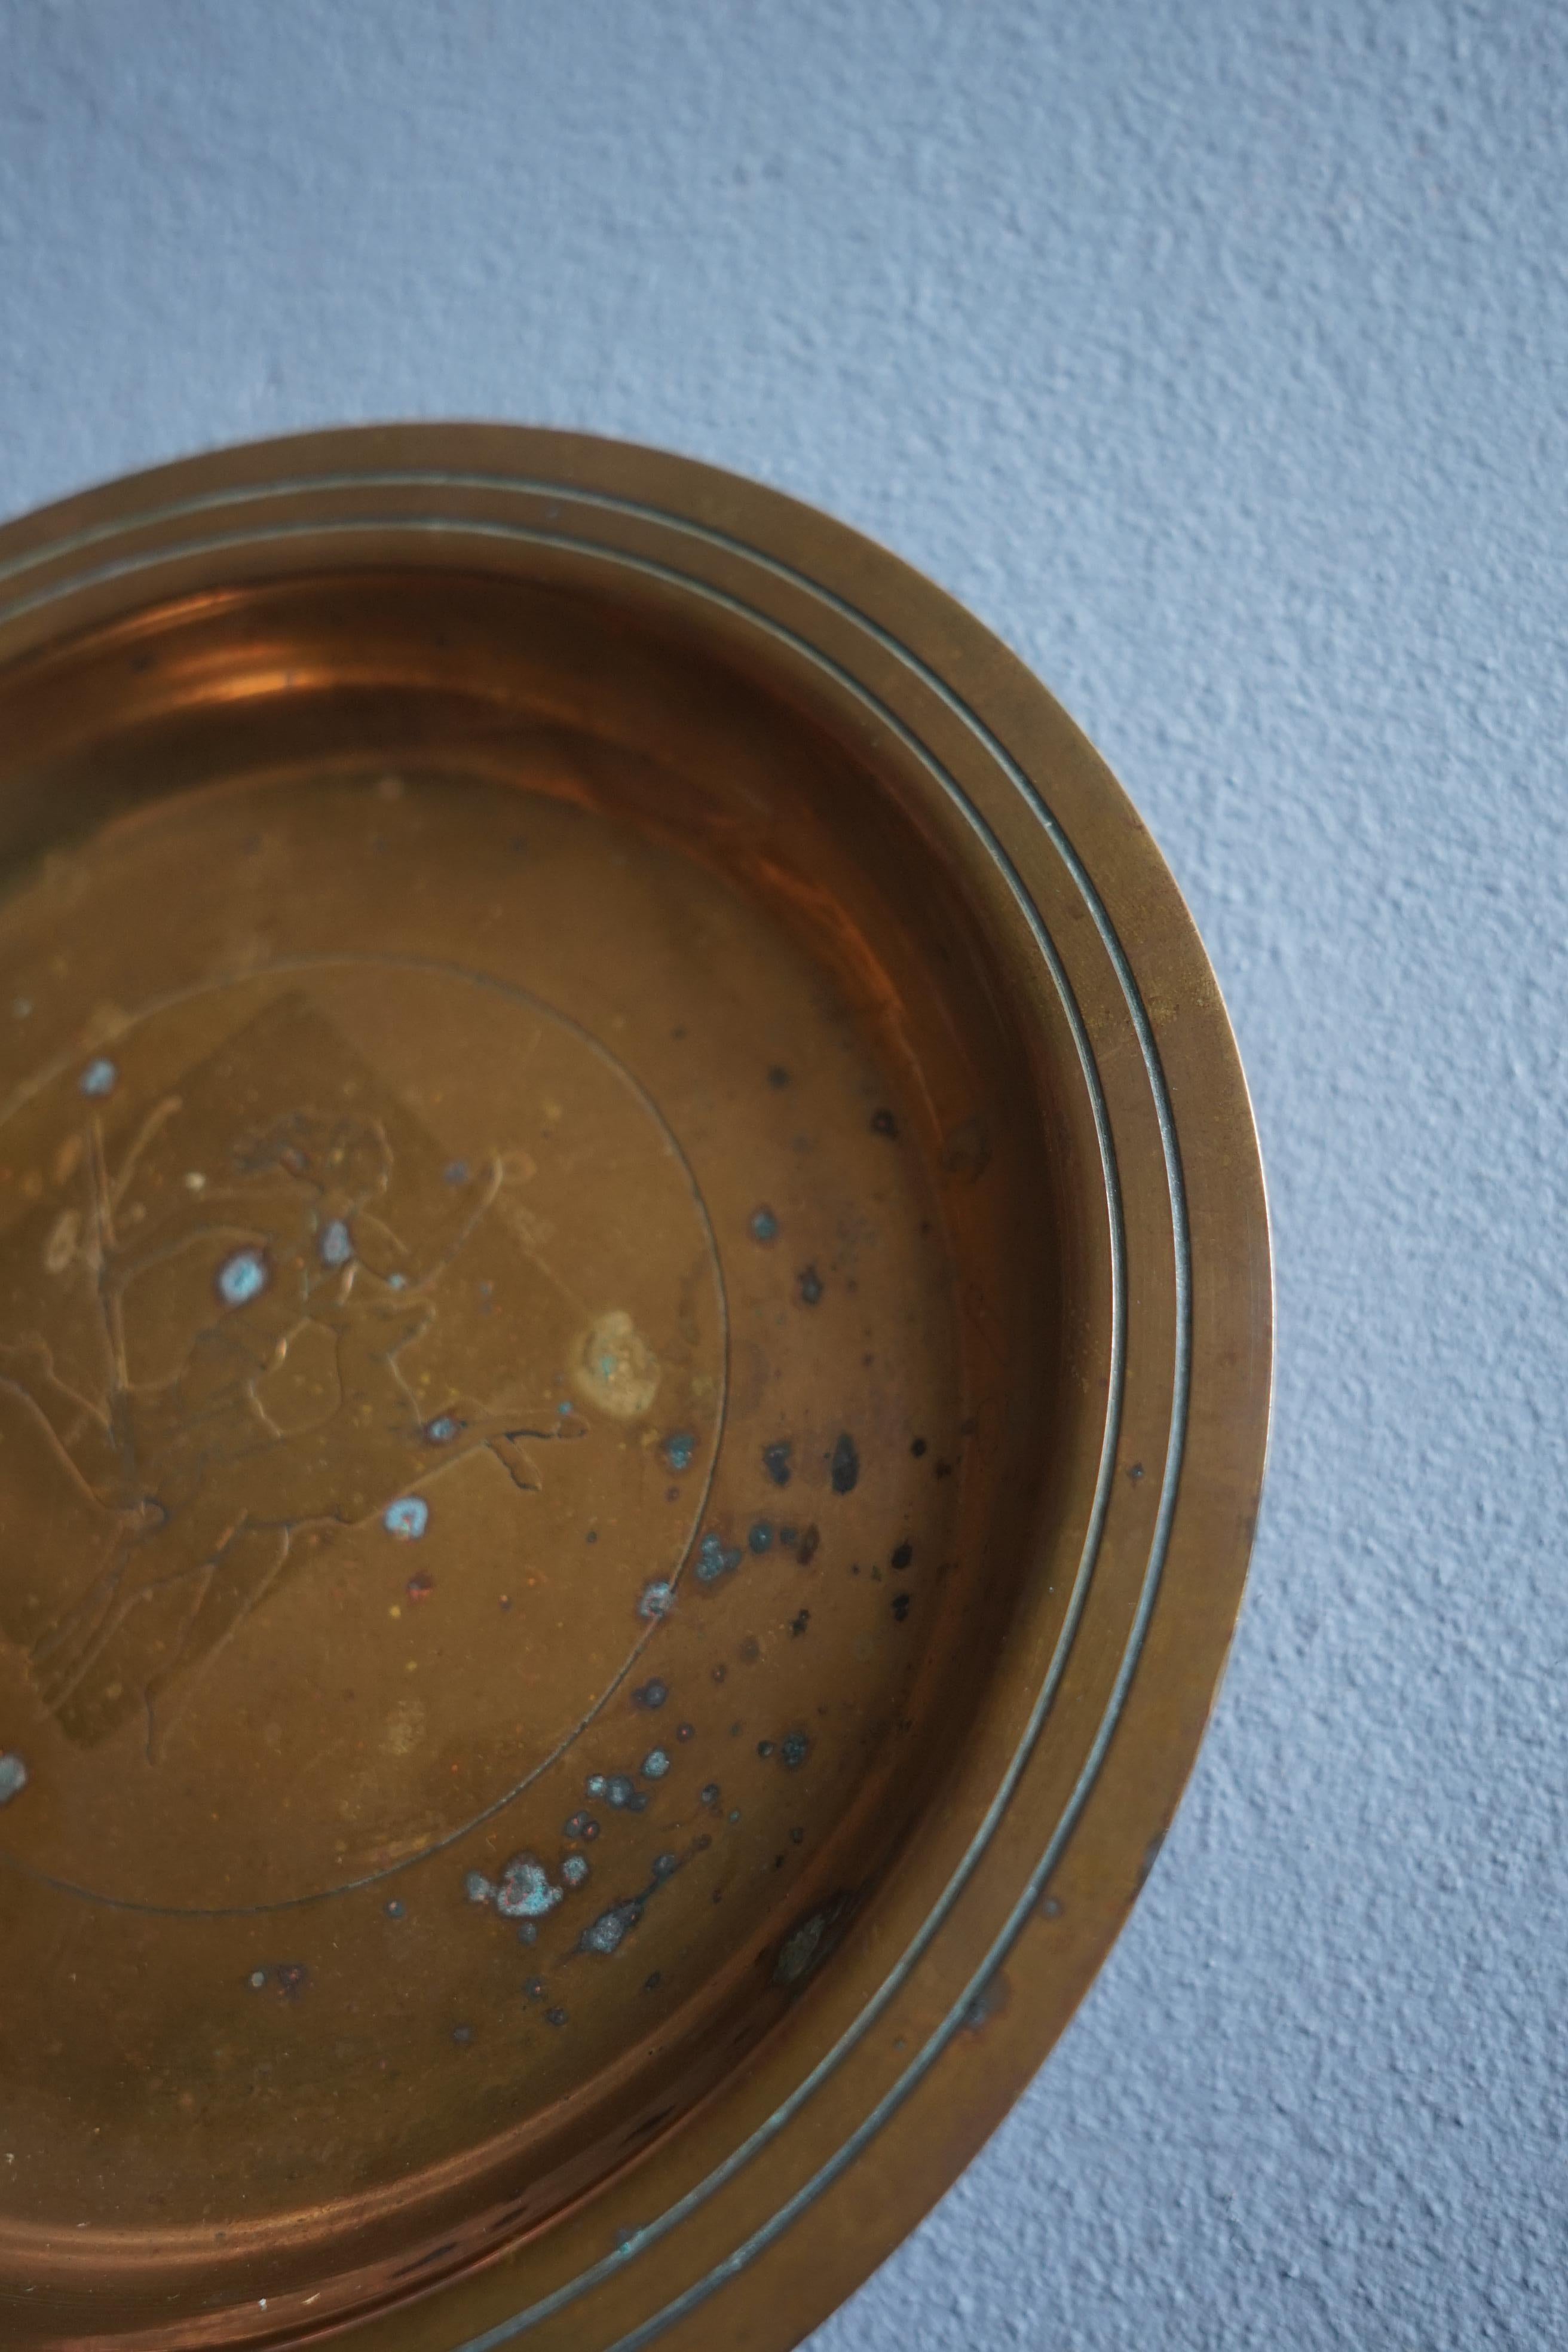 Beautiful patinaed Art Deco Bronze dish by danish manufacture Agentor from the 1930's.

The Dish has the motive of a woman running with her hunting dog next to her.

This dish is the perfect piece as a decorative element but can also be used as